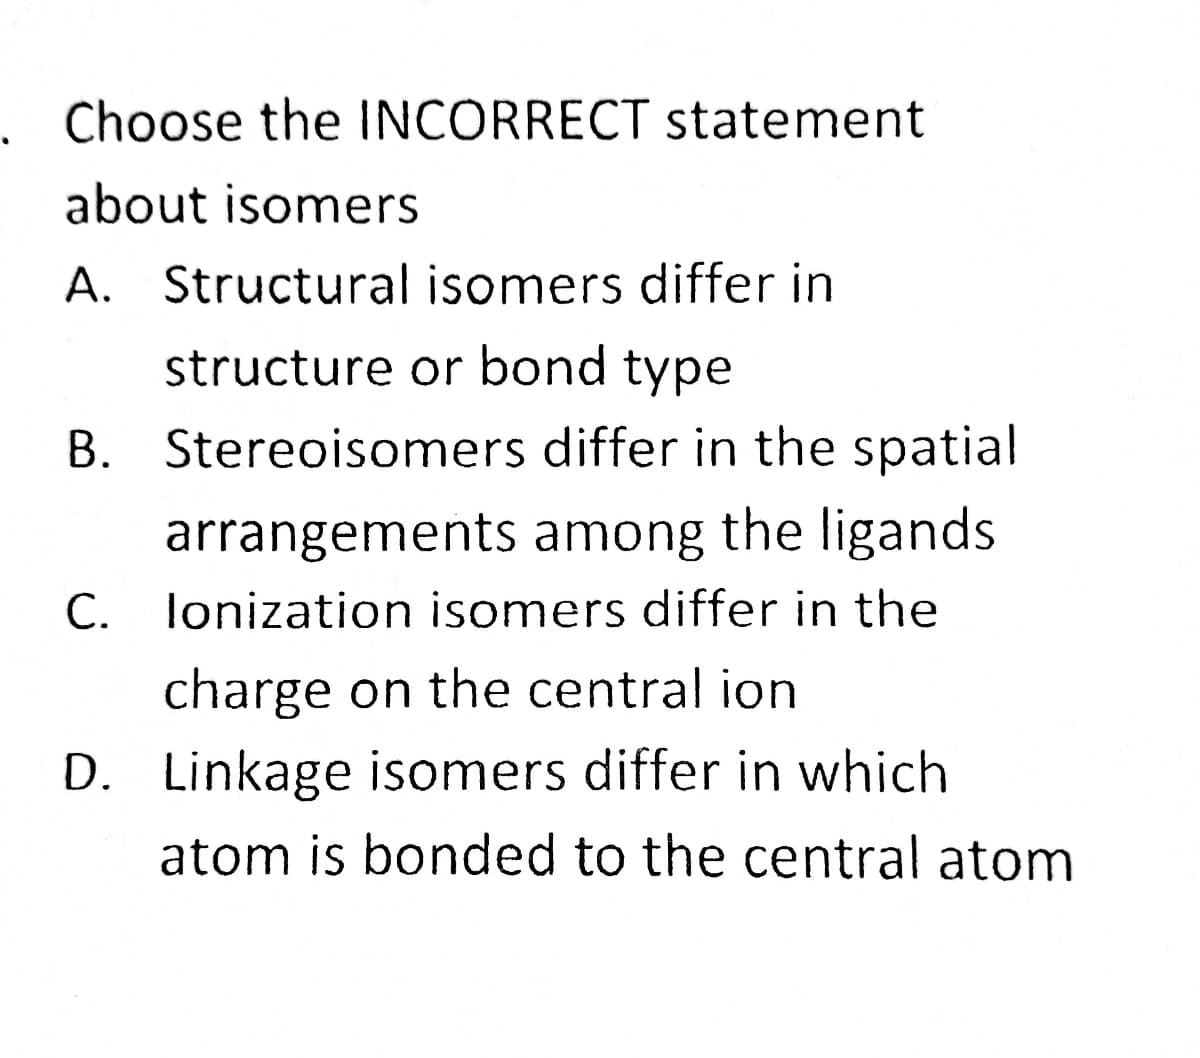 Choose the INCORRECT statement
about isomers
A. Structural isomers differ in
structure or bond type
B. Stereoisomers differ in the spatial
arrangements among the ligands
C. lonization isomers differ in the
charge on the central ion
D. Linkage isomers differ in which
atom is bonded to the central atom
